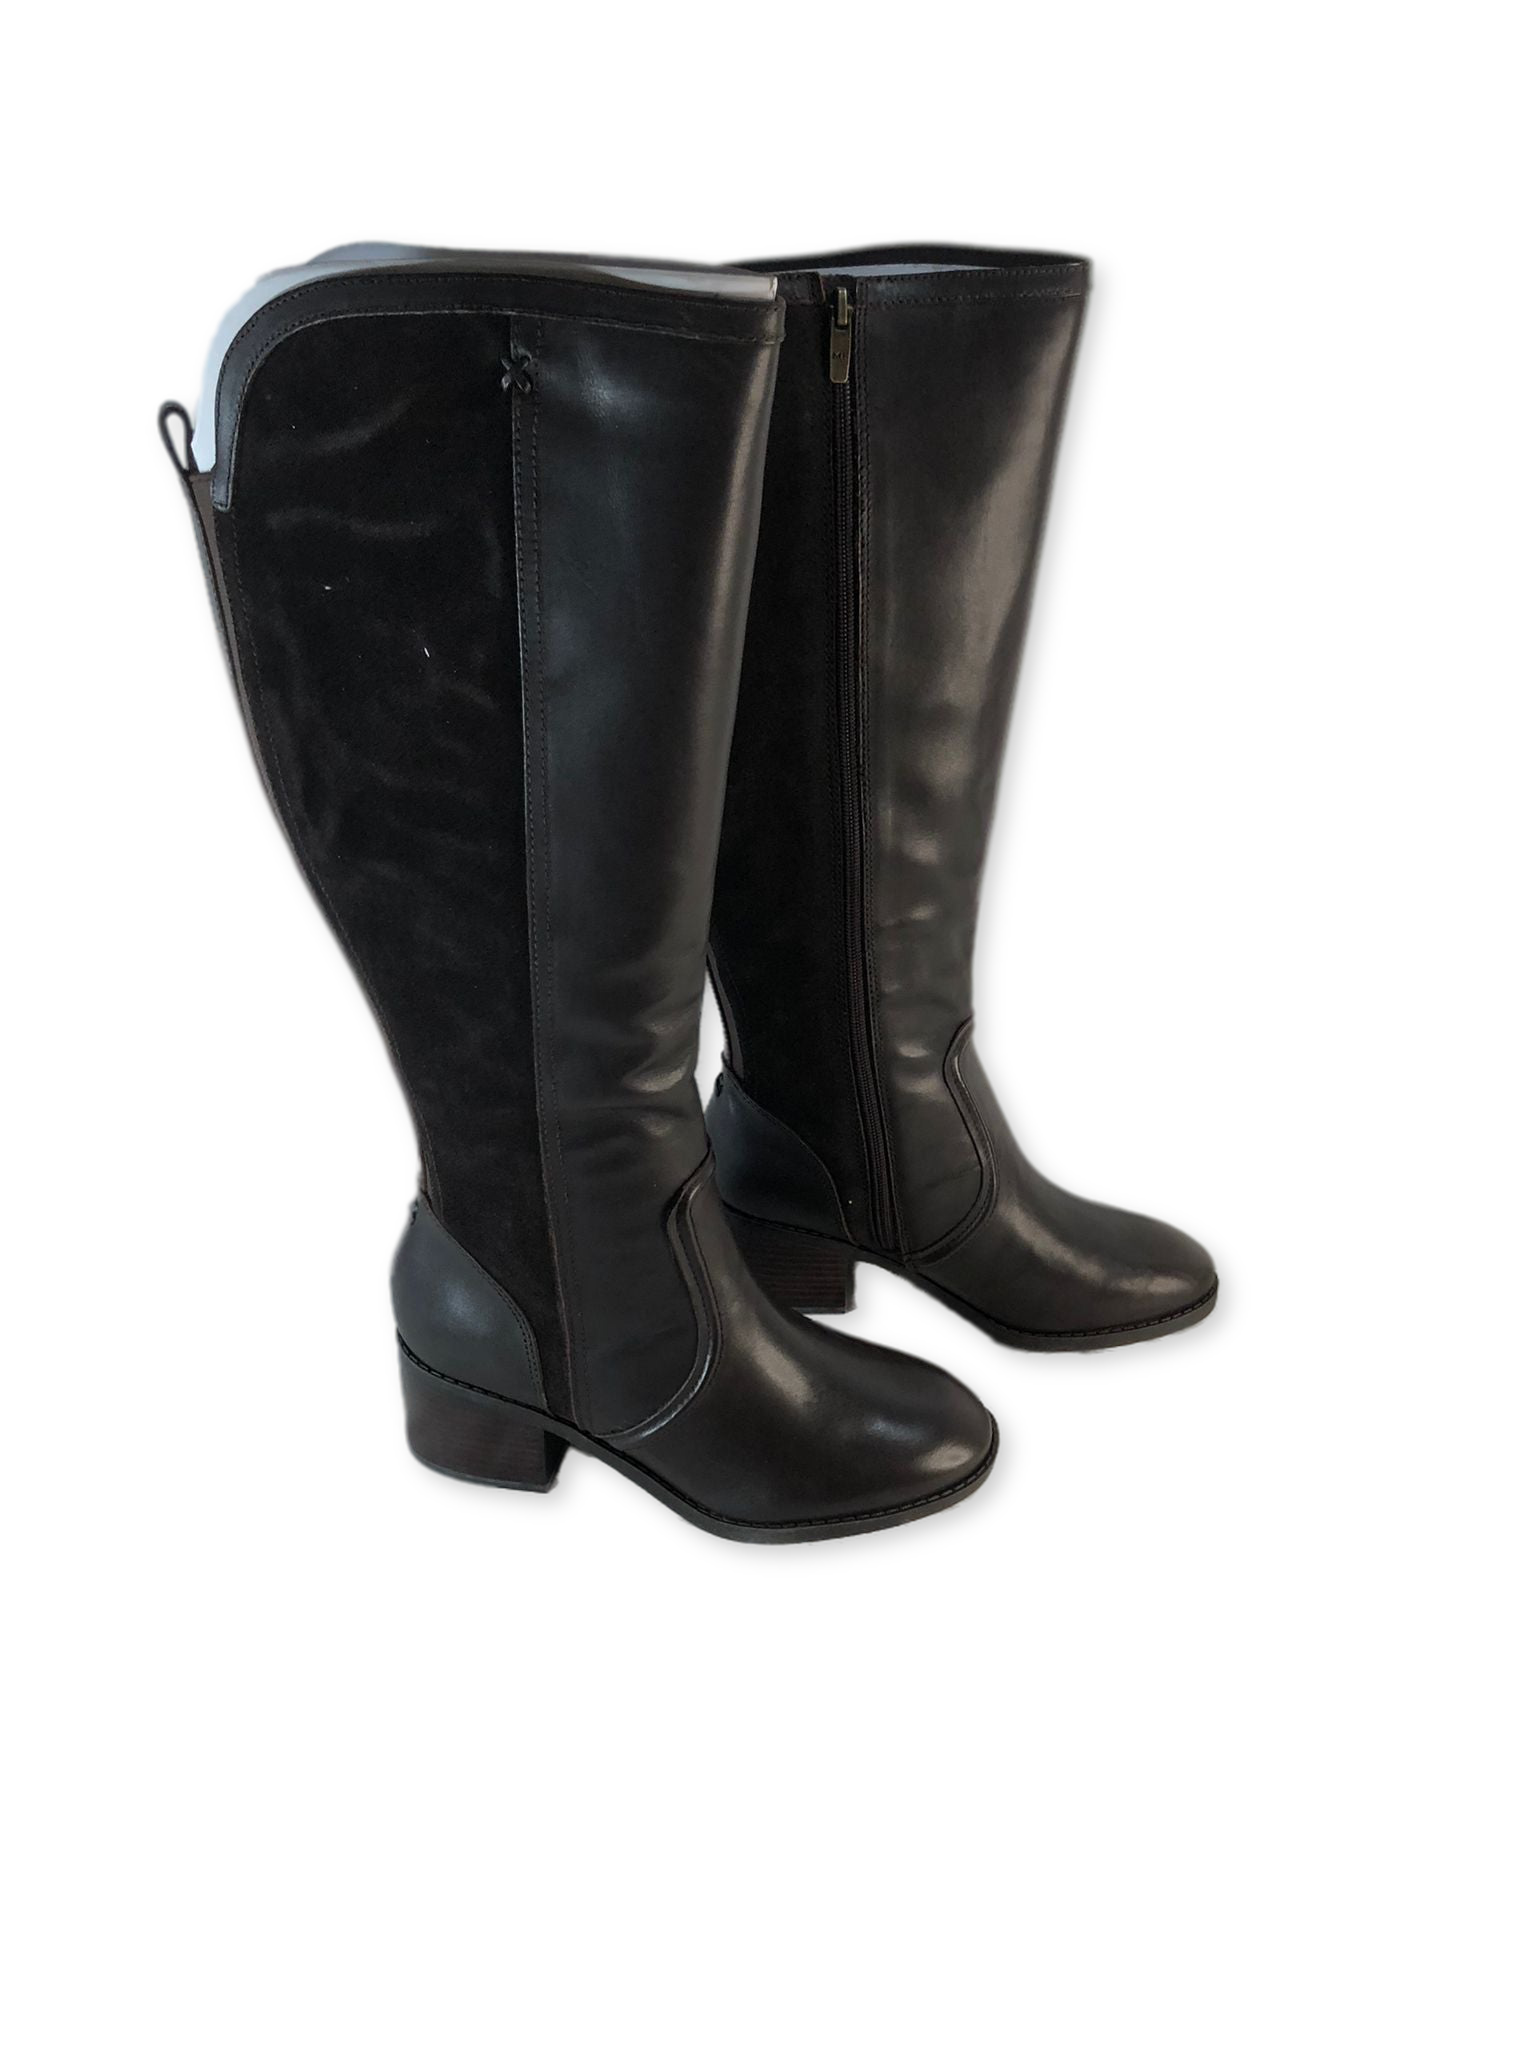 Marc Fisher Wide Calf Leather Tall Shaft Boots - Riyea